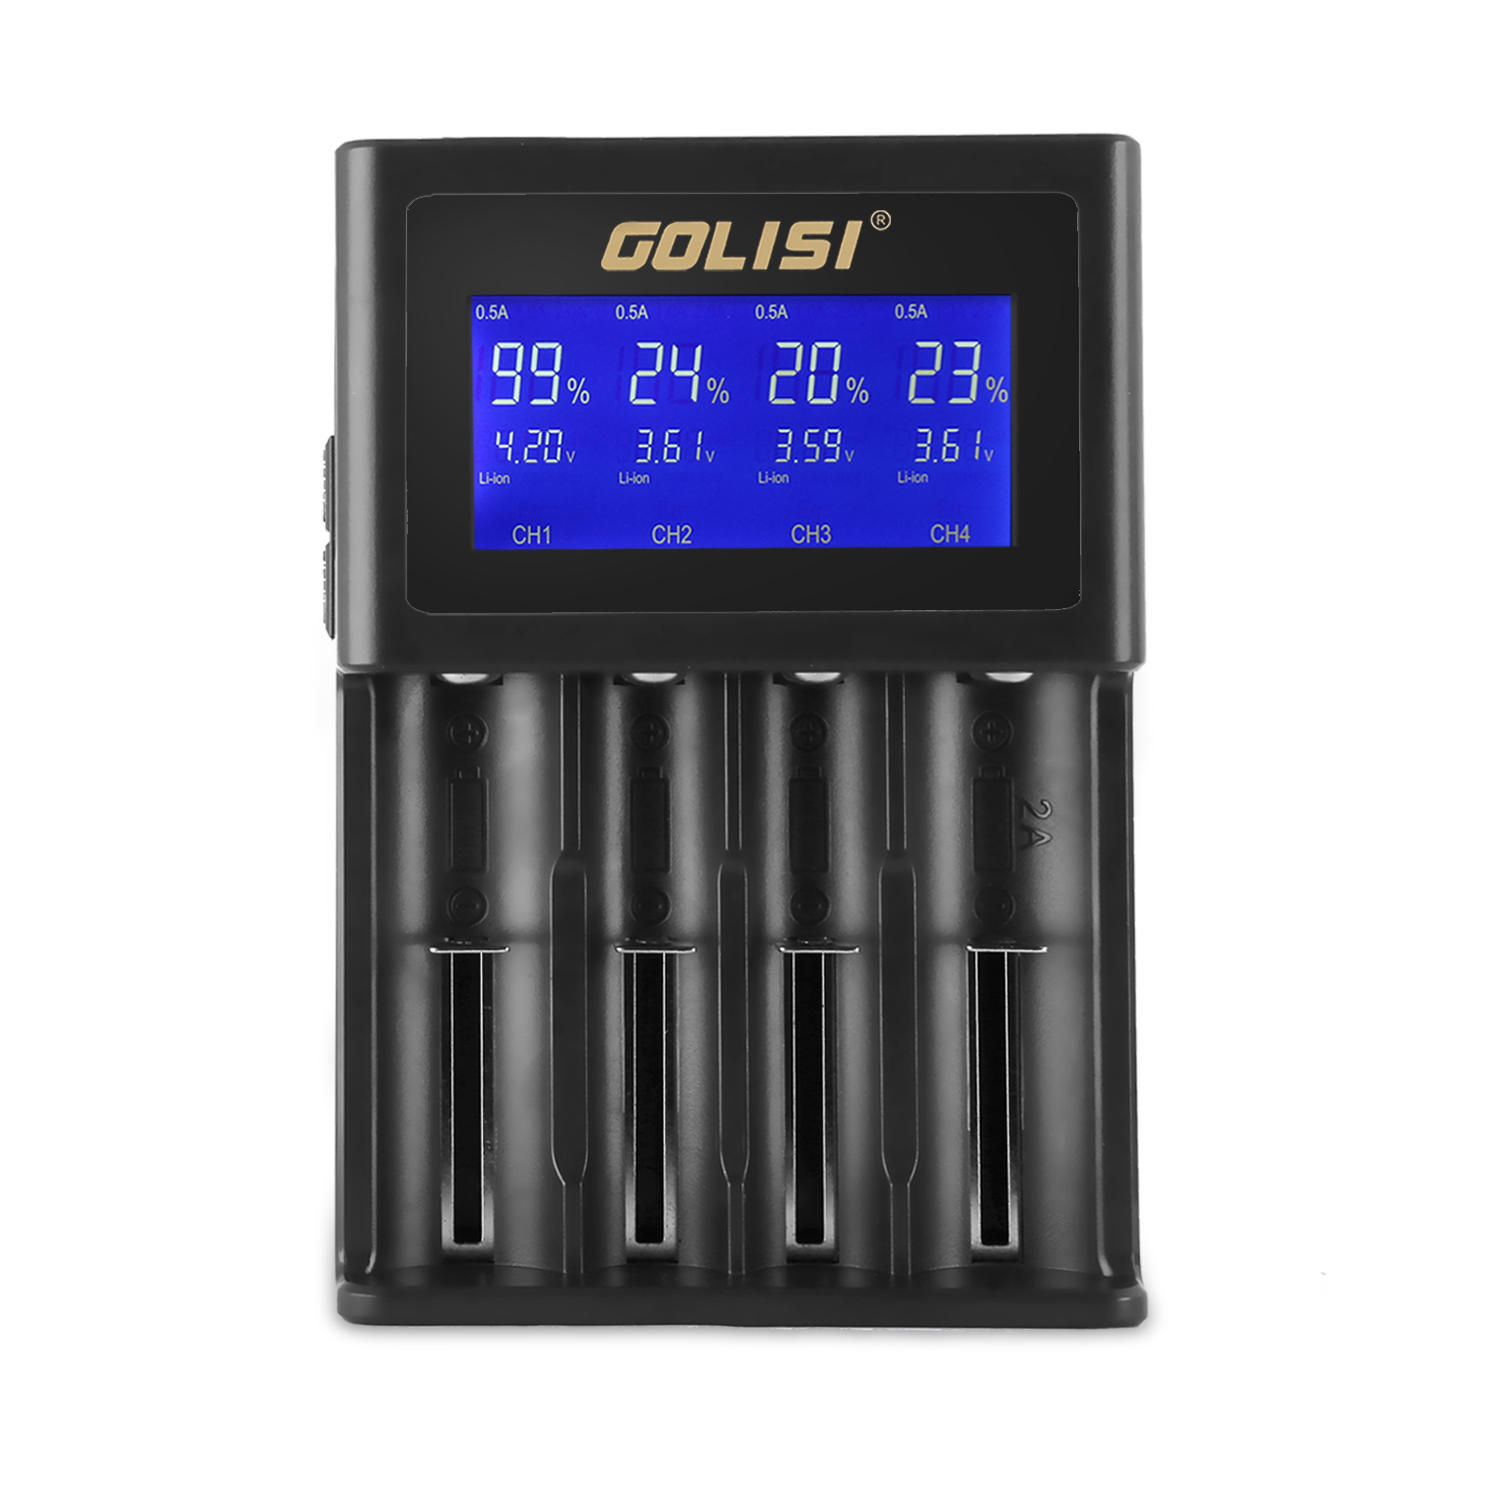 best price,golisi,s4,battery,charger,discount